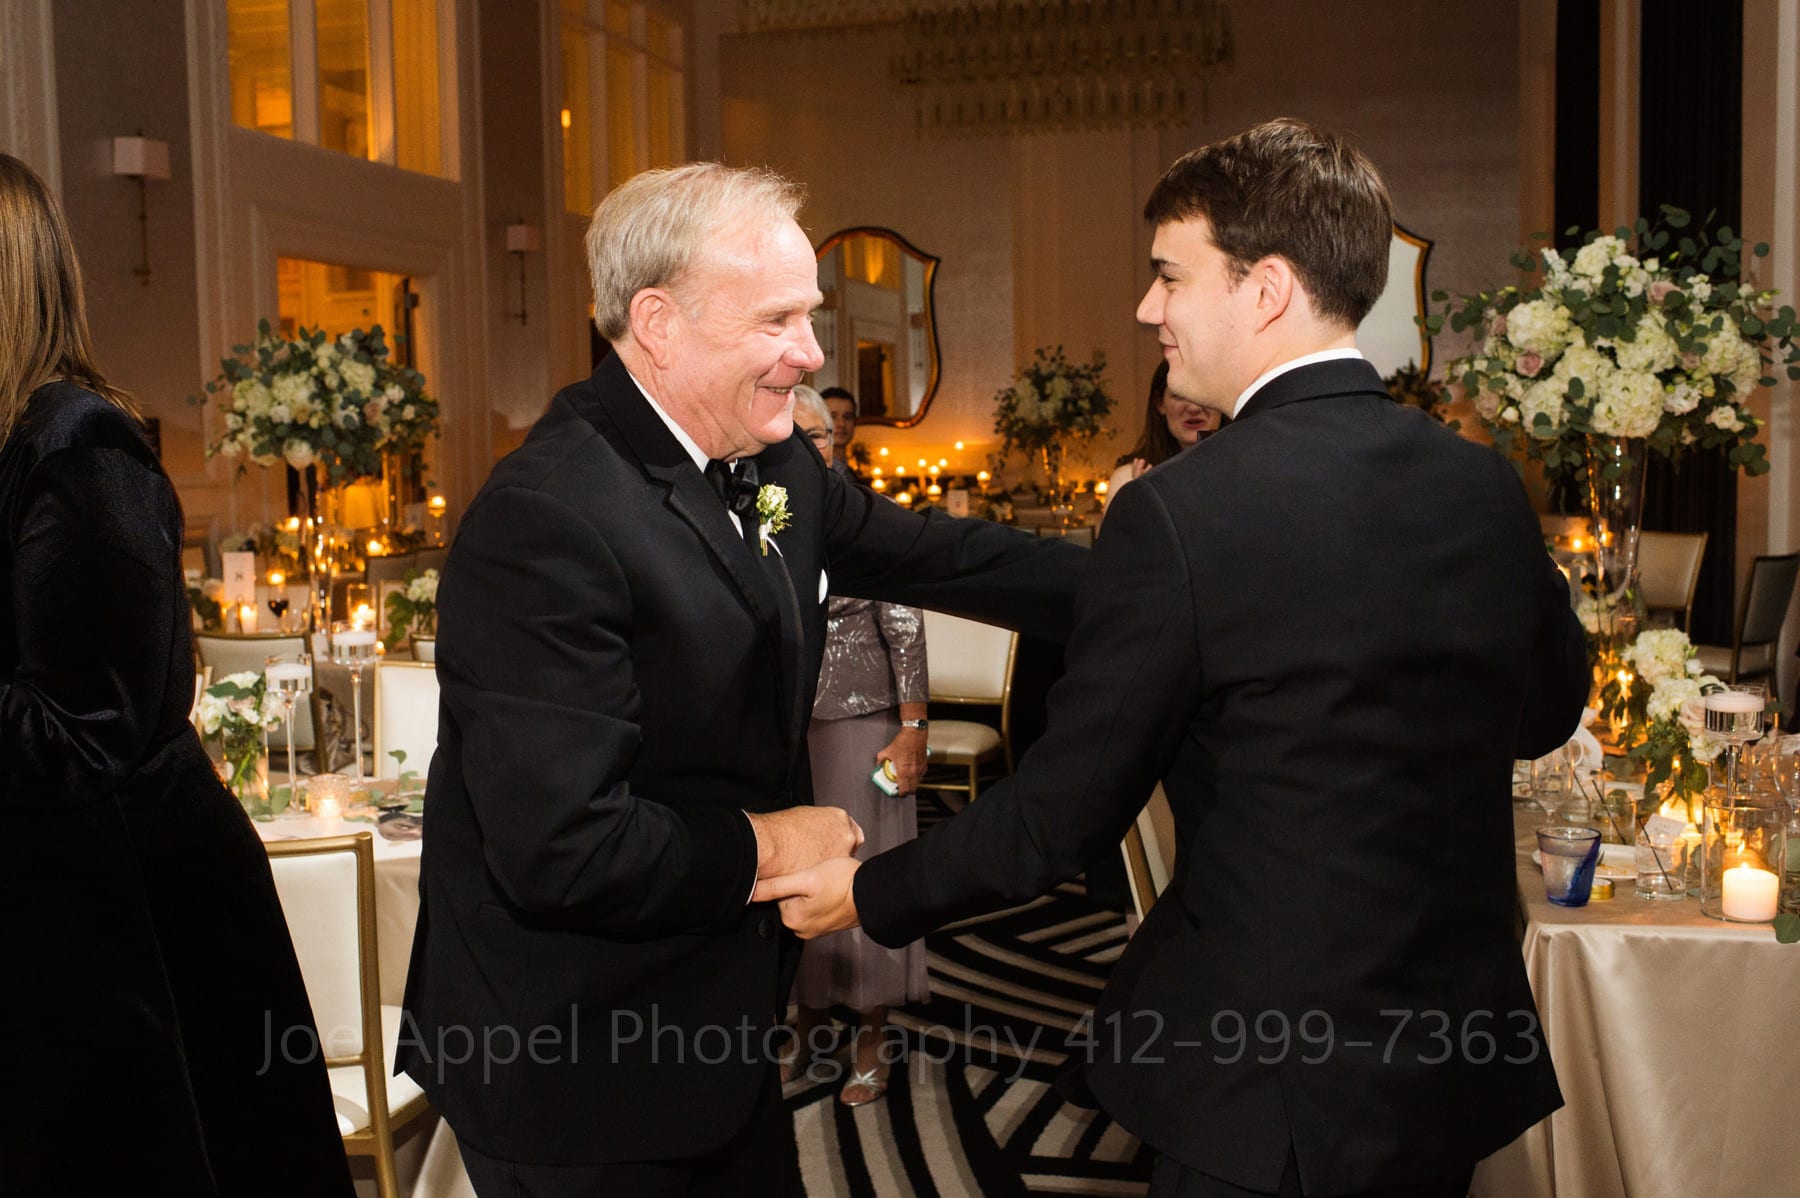 a groom dances with his father, they're both wearing black tuxedos.